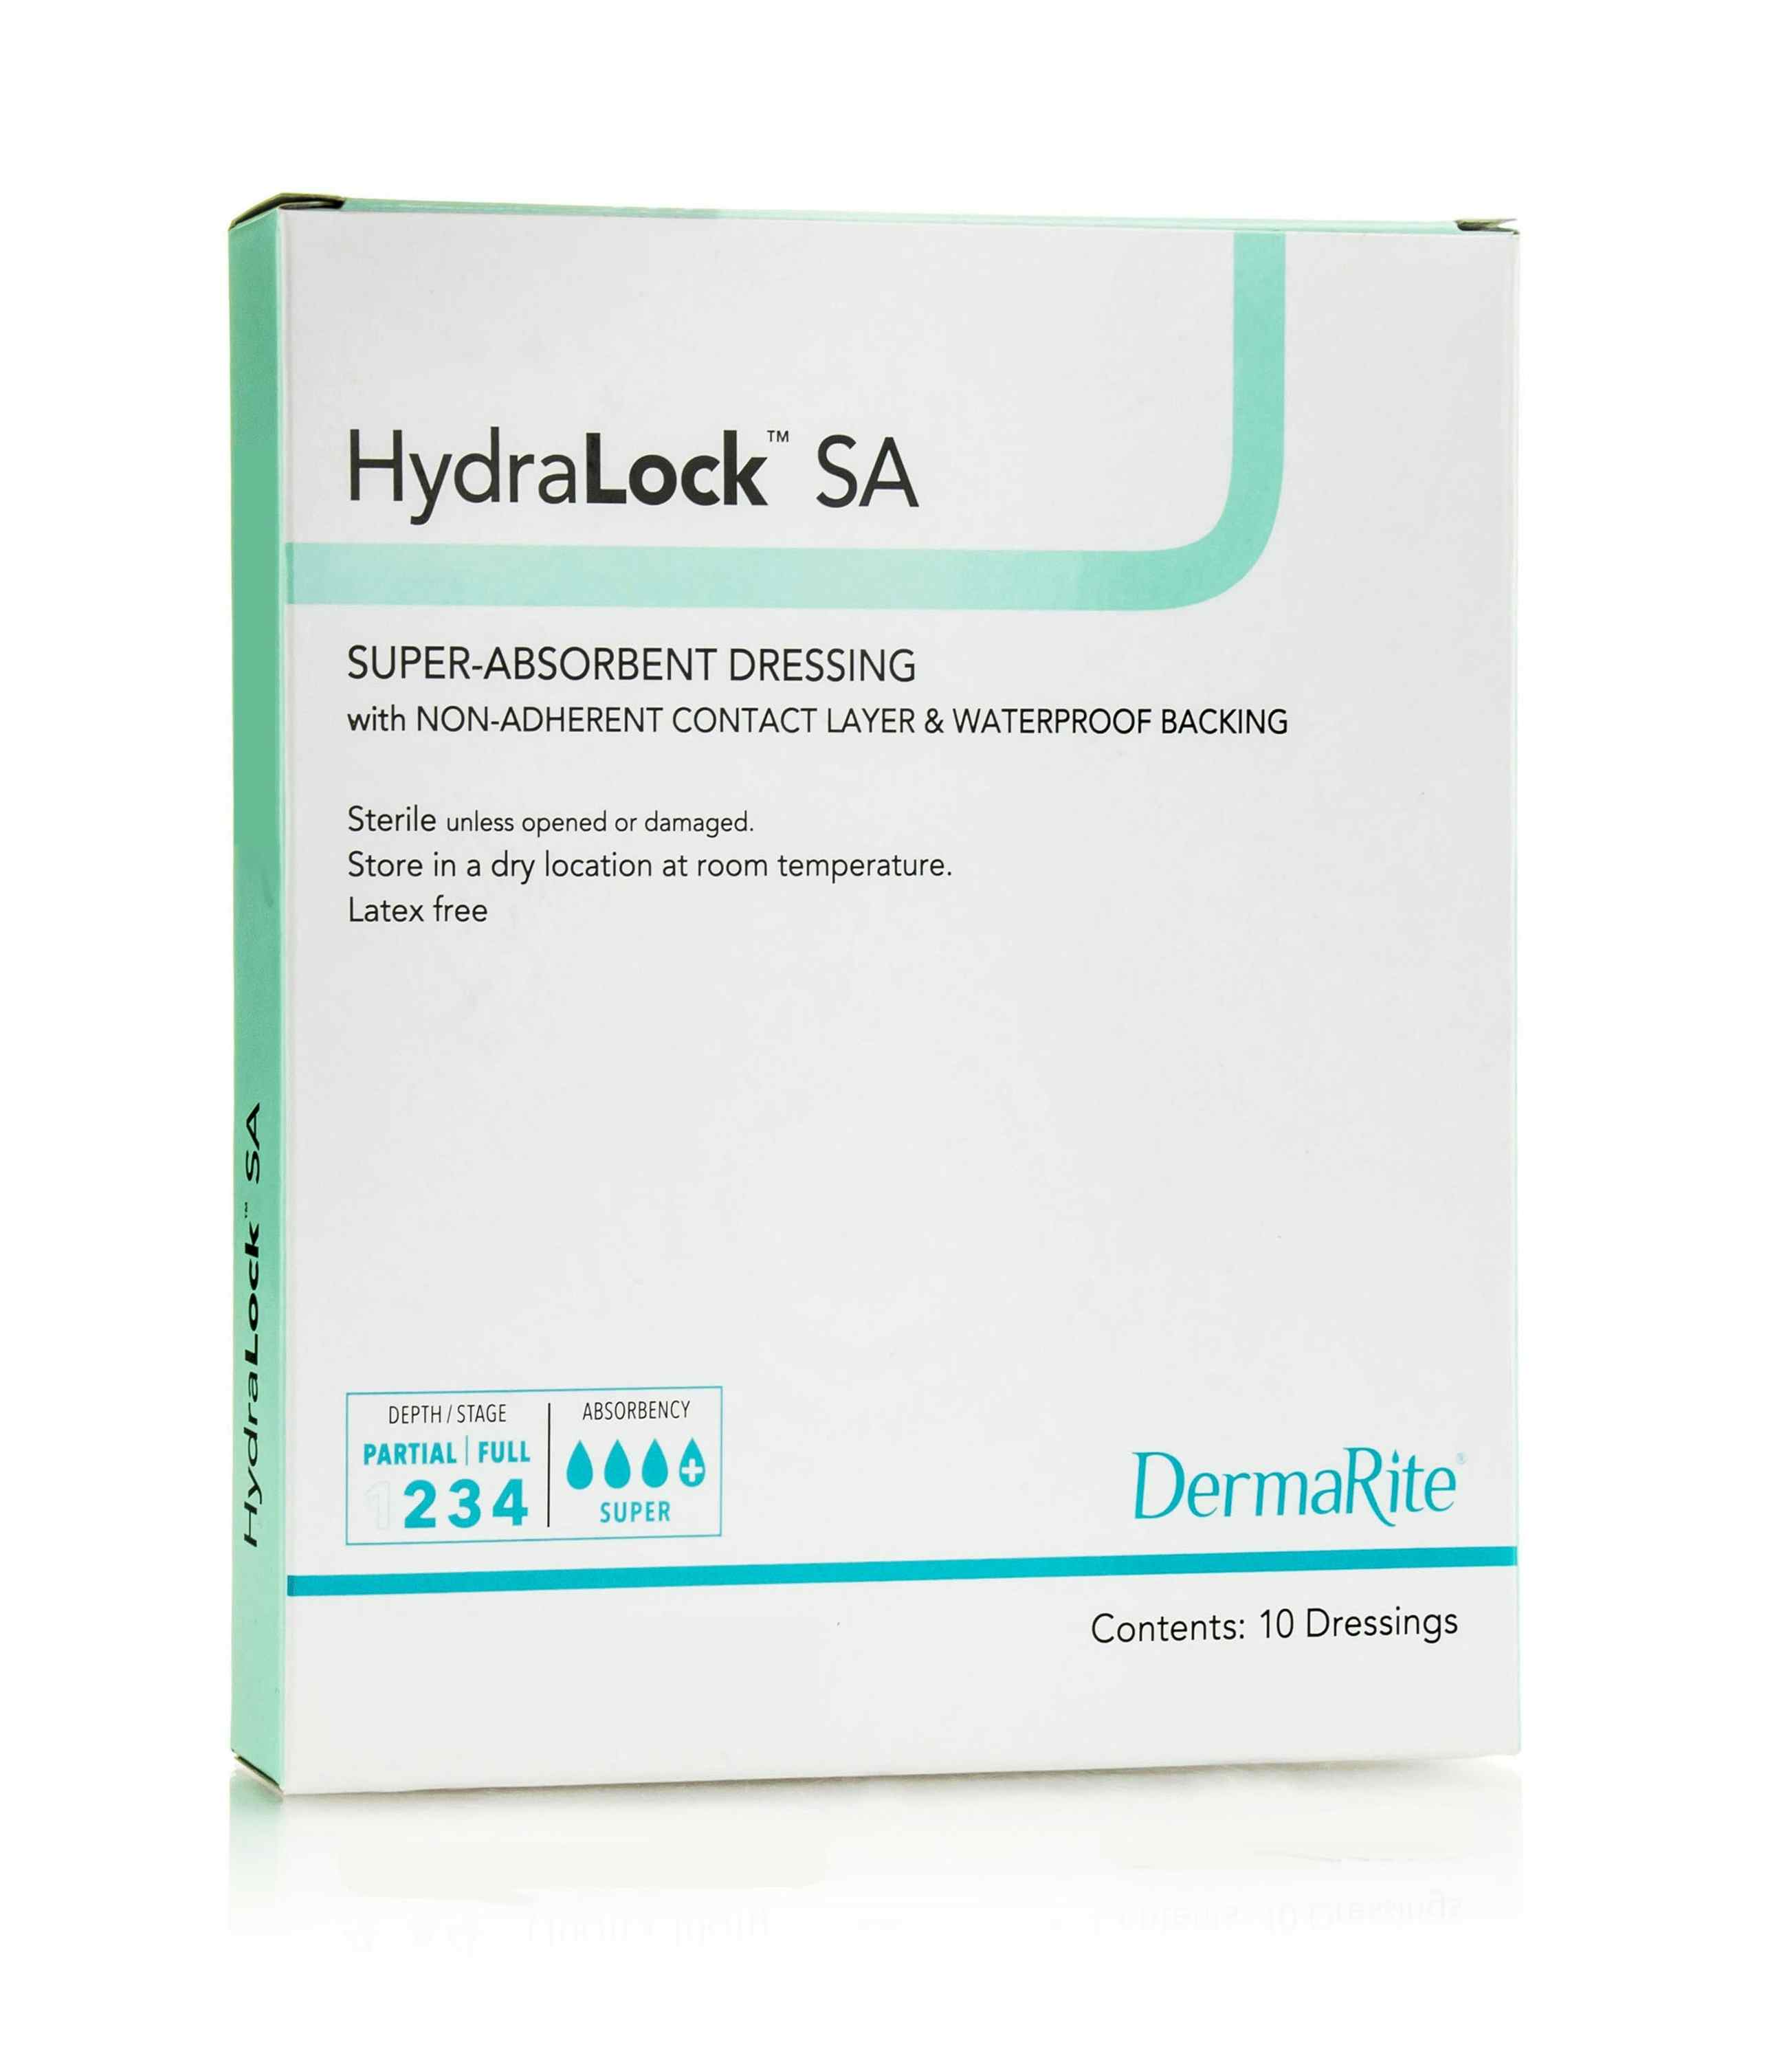 HydraLock SA Super-Absorbent Dressing with Non-Adherent Contact Layer & Waterproof Backing, 6 X 10", 60610, Box of 10